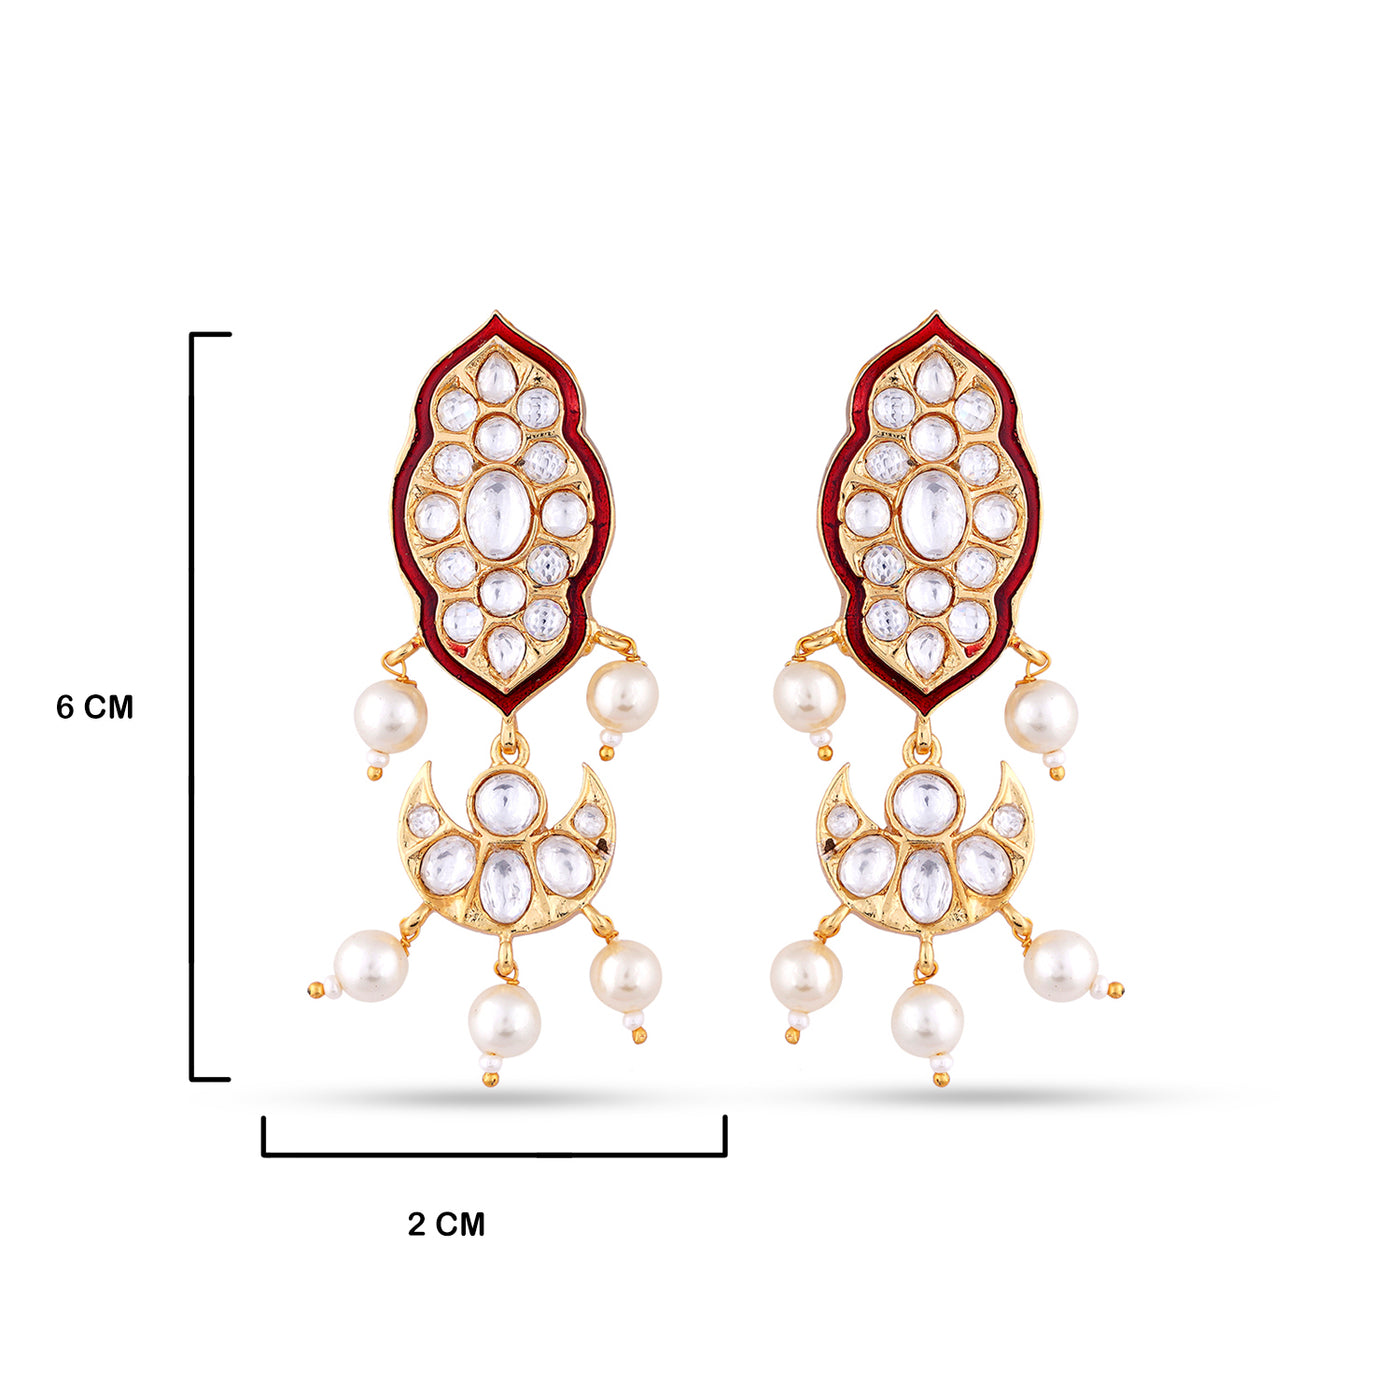 Red Pearled Kundan Earrings with measurements in cm. 6cm by 2cm.